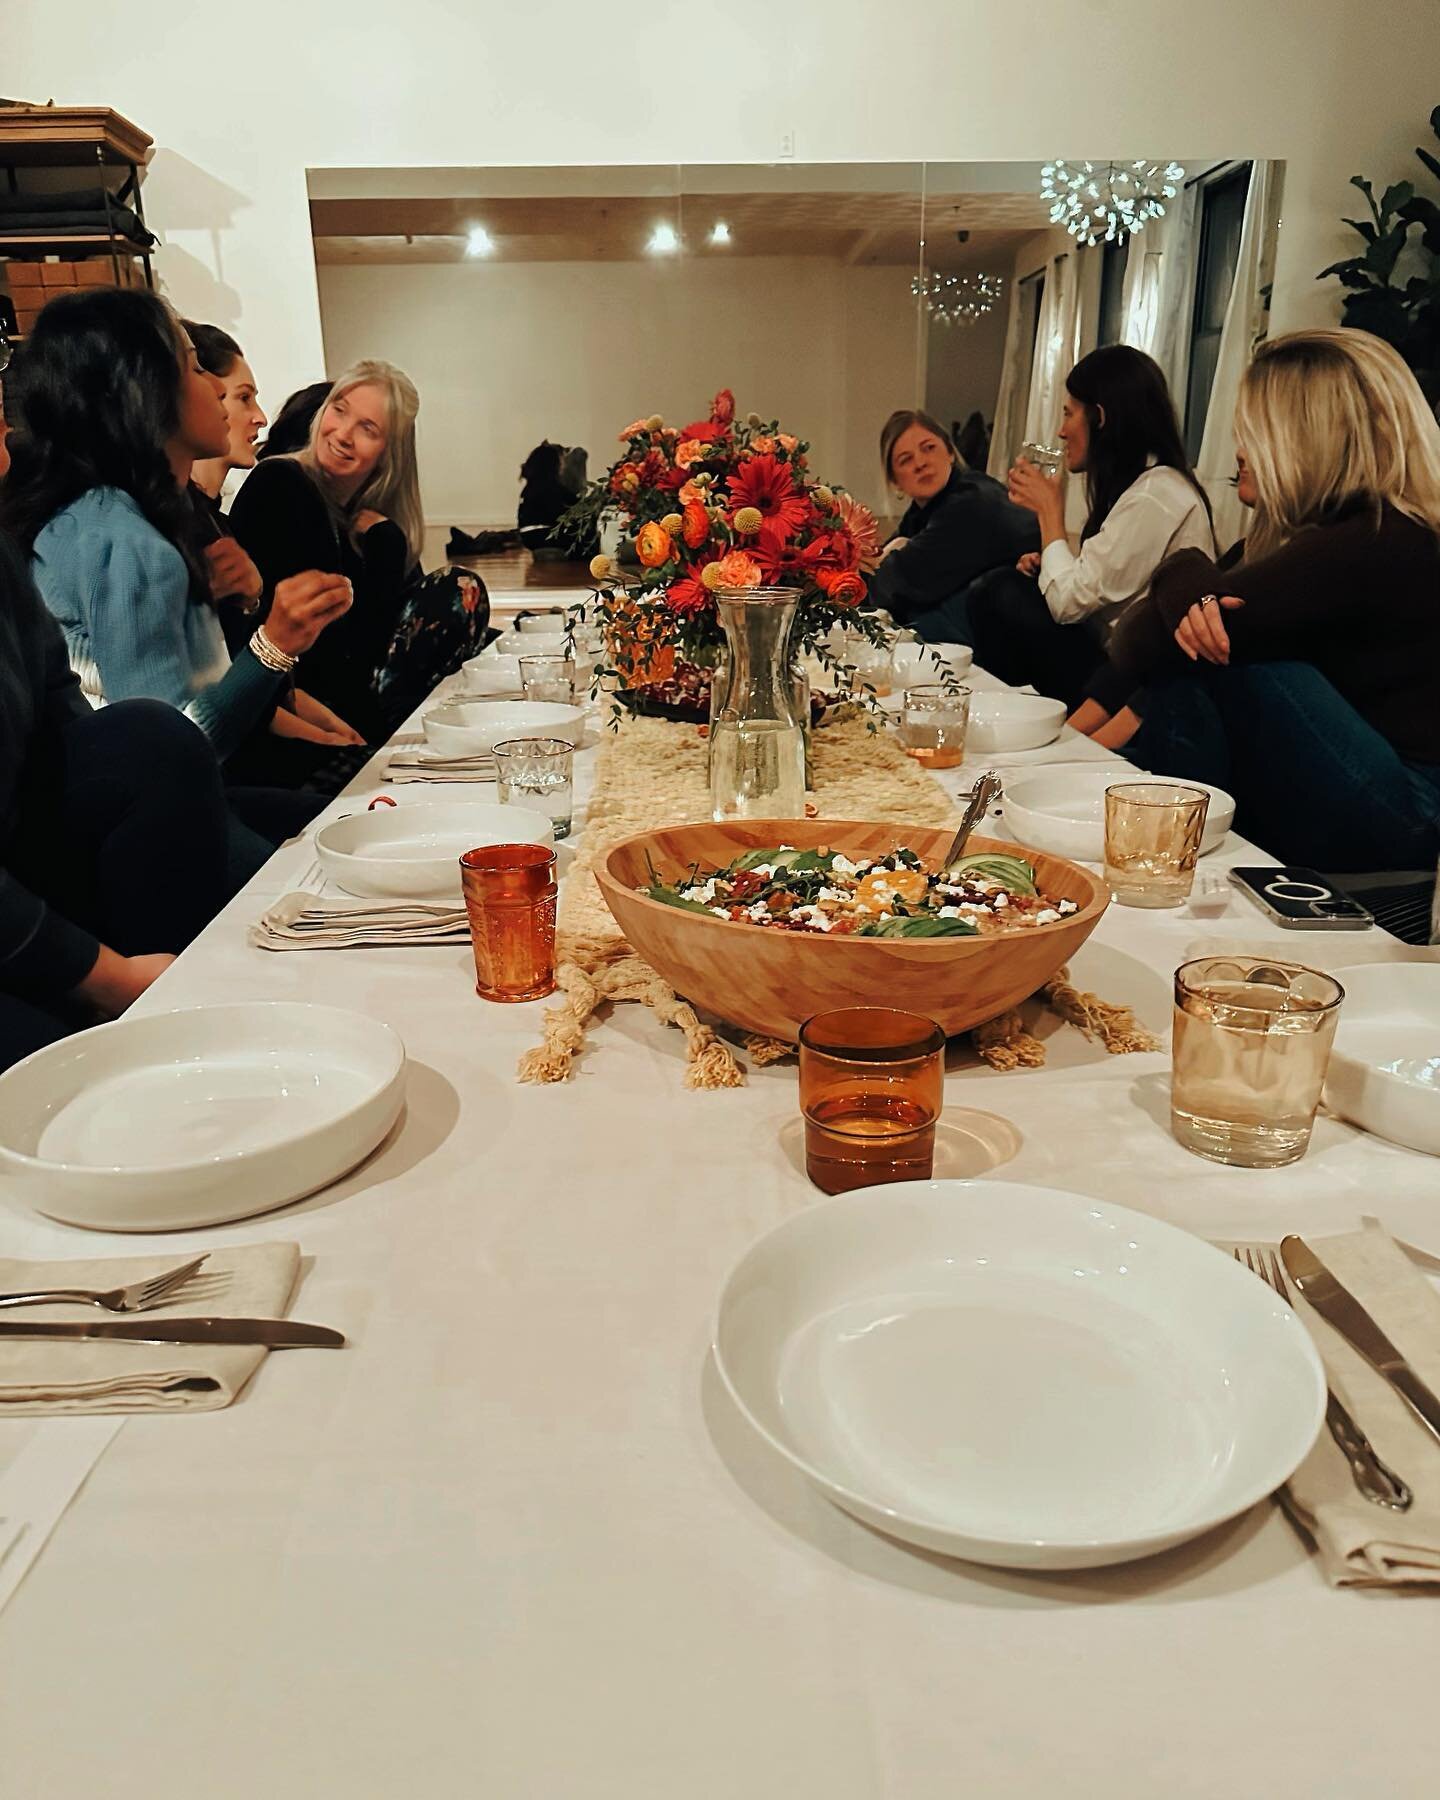 The Gathering 💫

To the 13 women who joined in circle on Saturday evening, I am so honored and nourished by each of your presence. 

I have the privilege of working with women 1:1 each week and while we&rsquo;re each walking our own path, what is ev